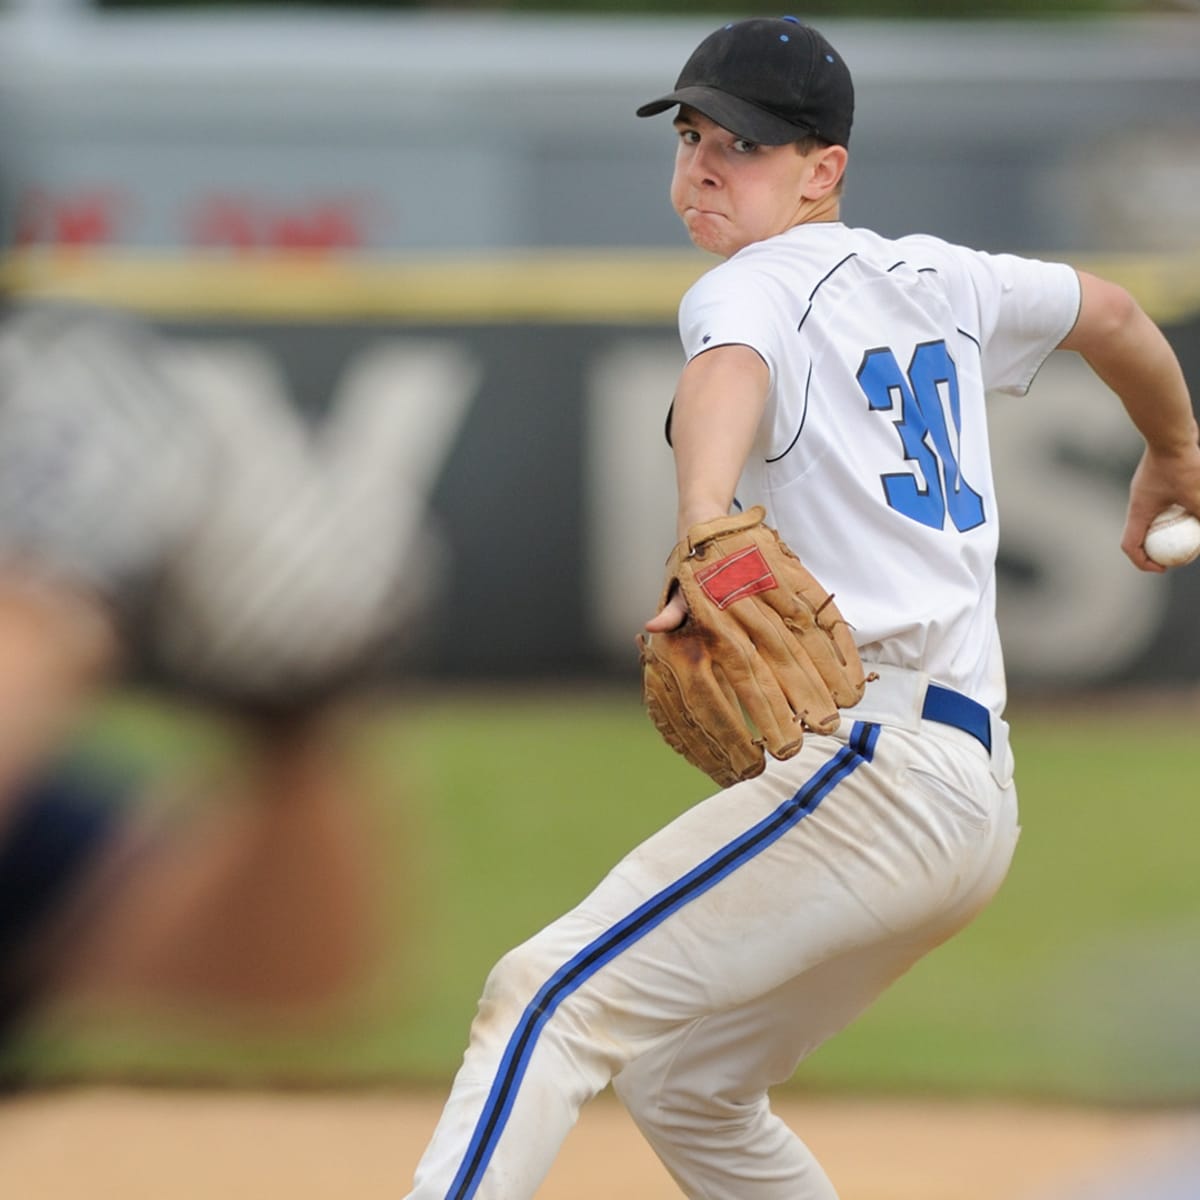 Why Early Sport Specialization Ends in Career-Ending Injury for Most Kids